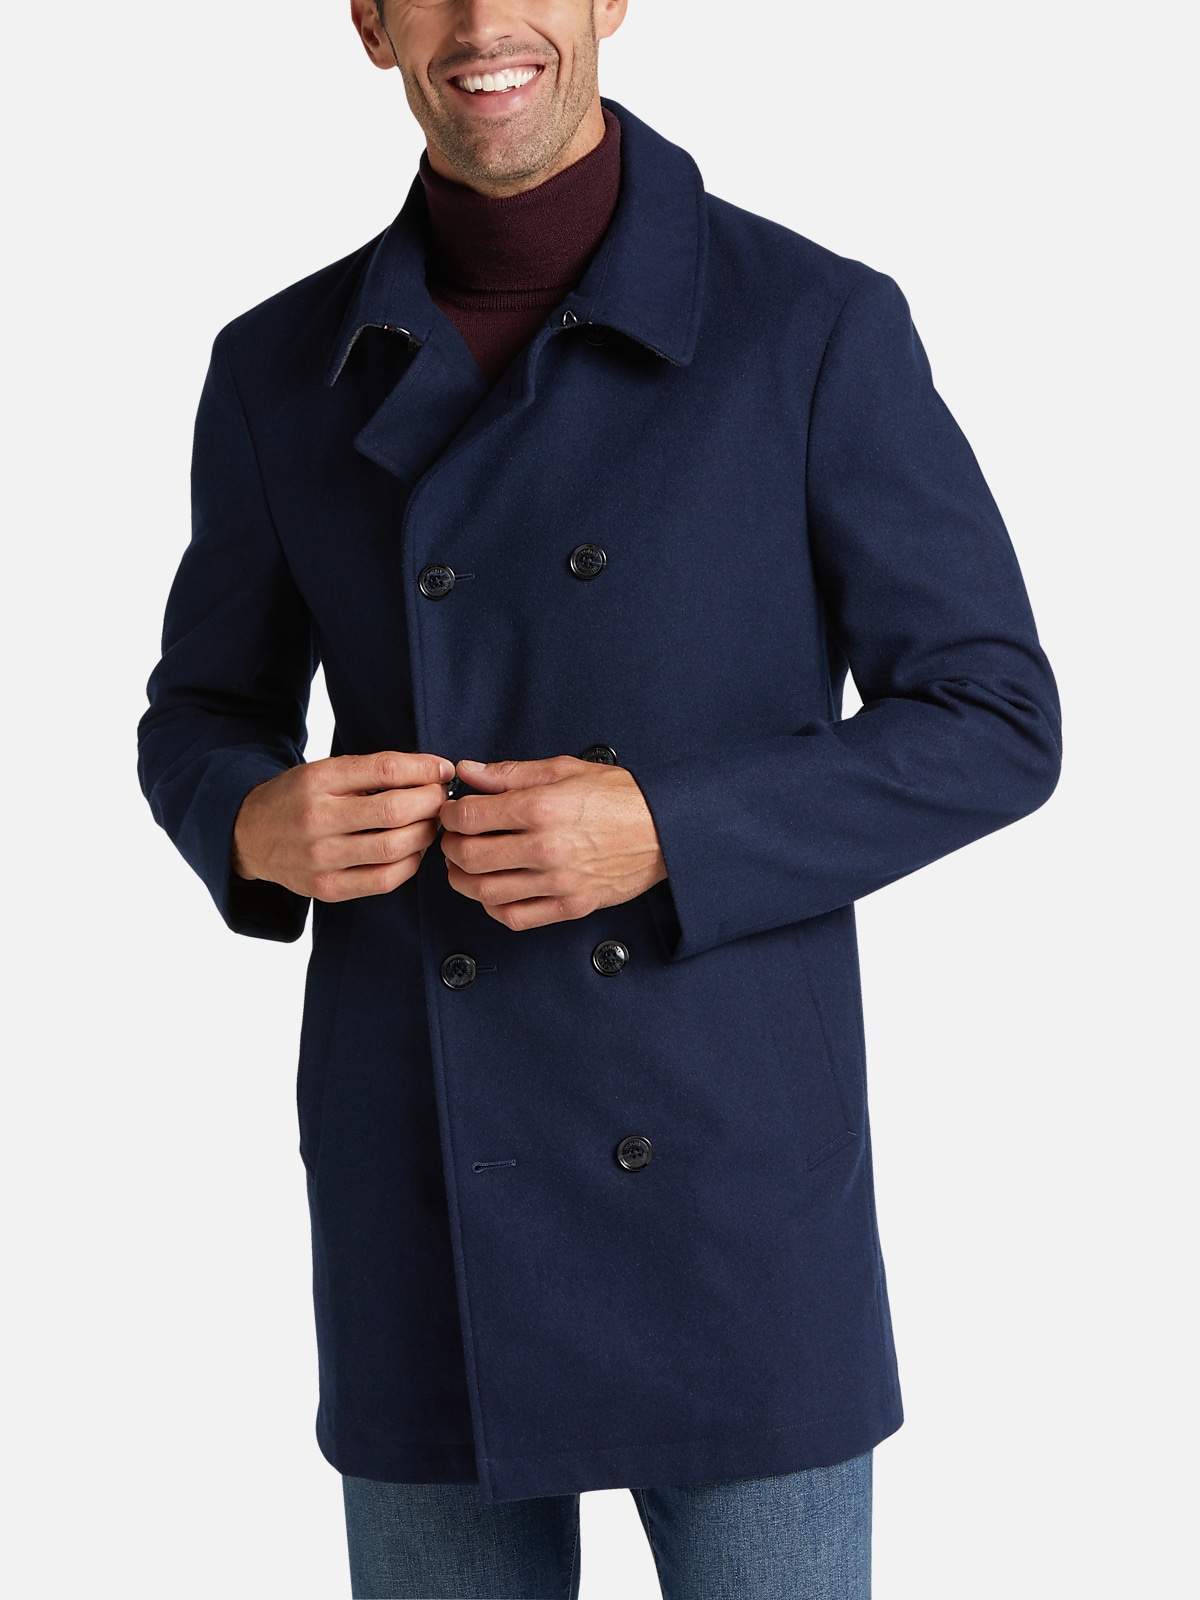 Tommy Hilfiger Modern Fit Peacoat | All Clearance $39.99| Men's Wearhouse